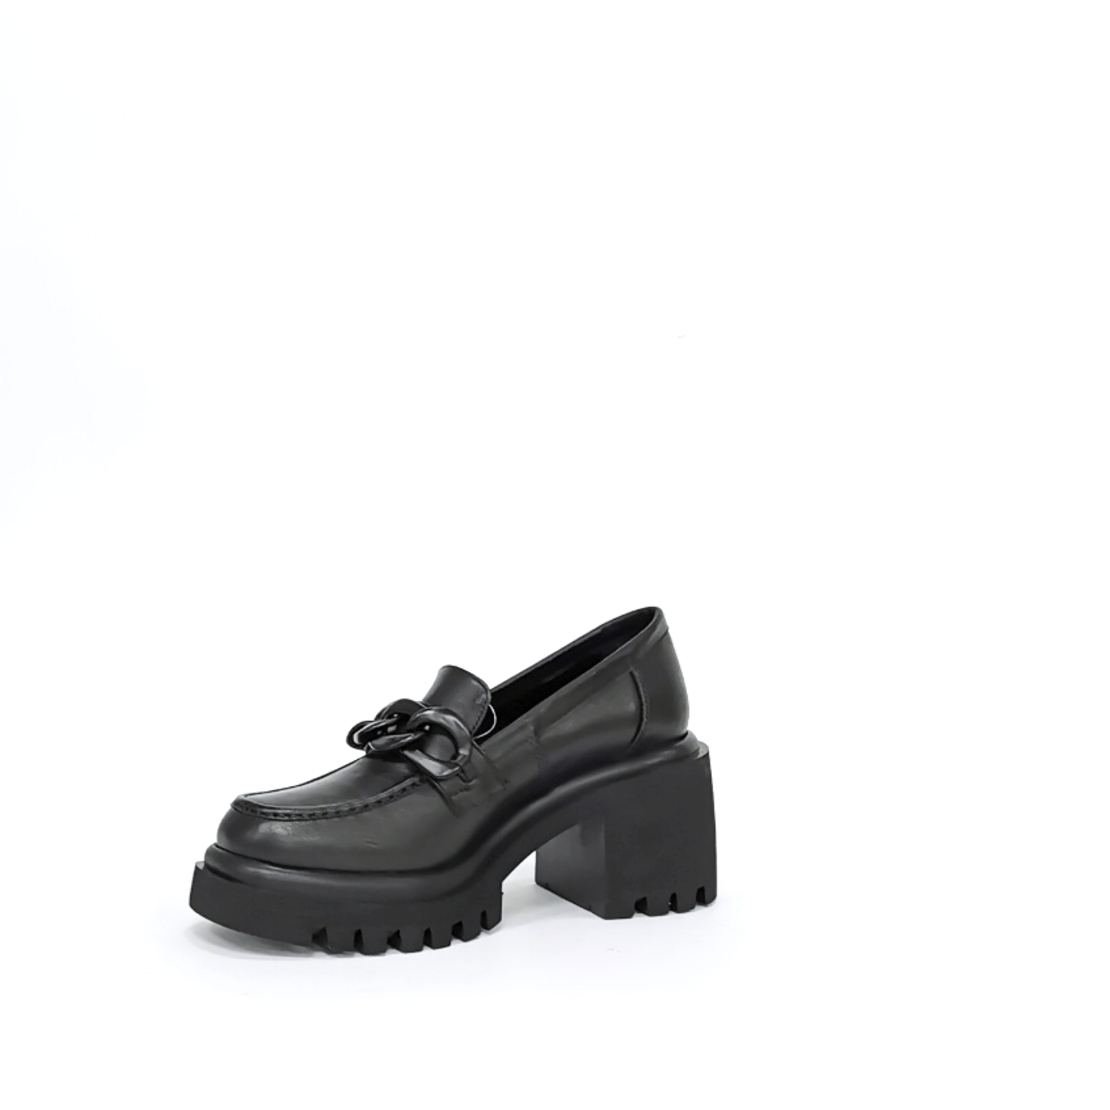 Women's moccasins / loafers / made of natural leather in black color/727719